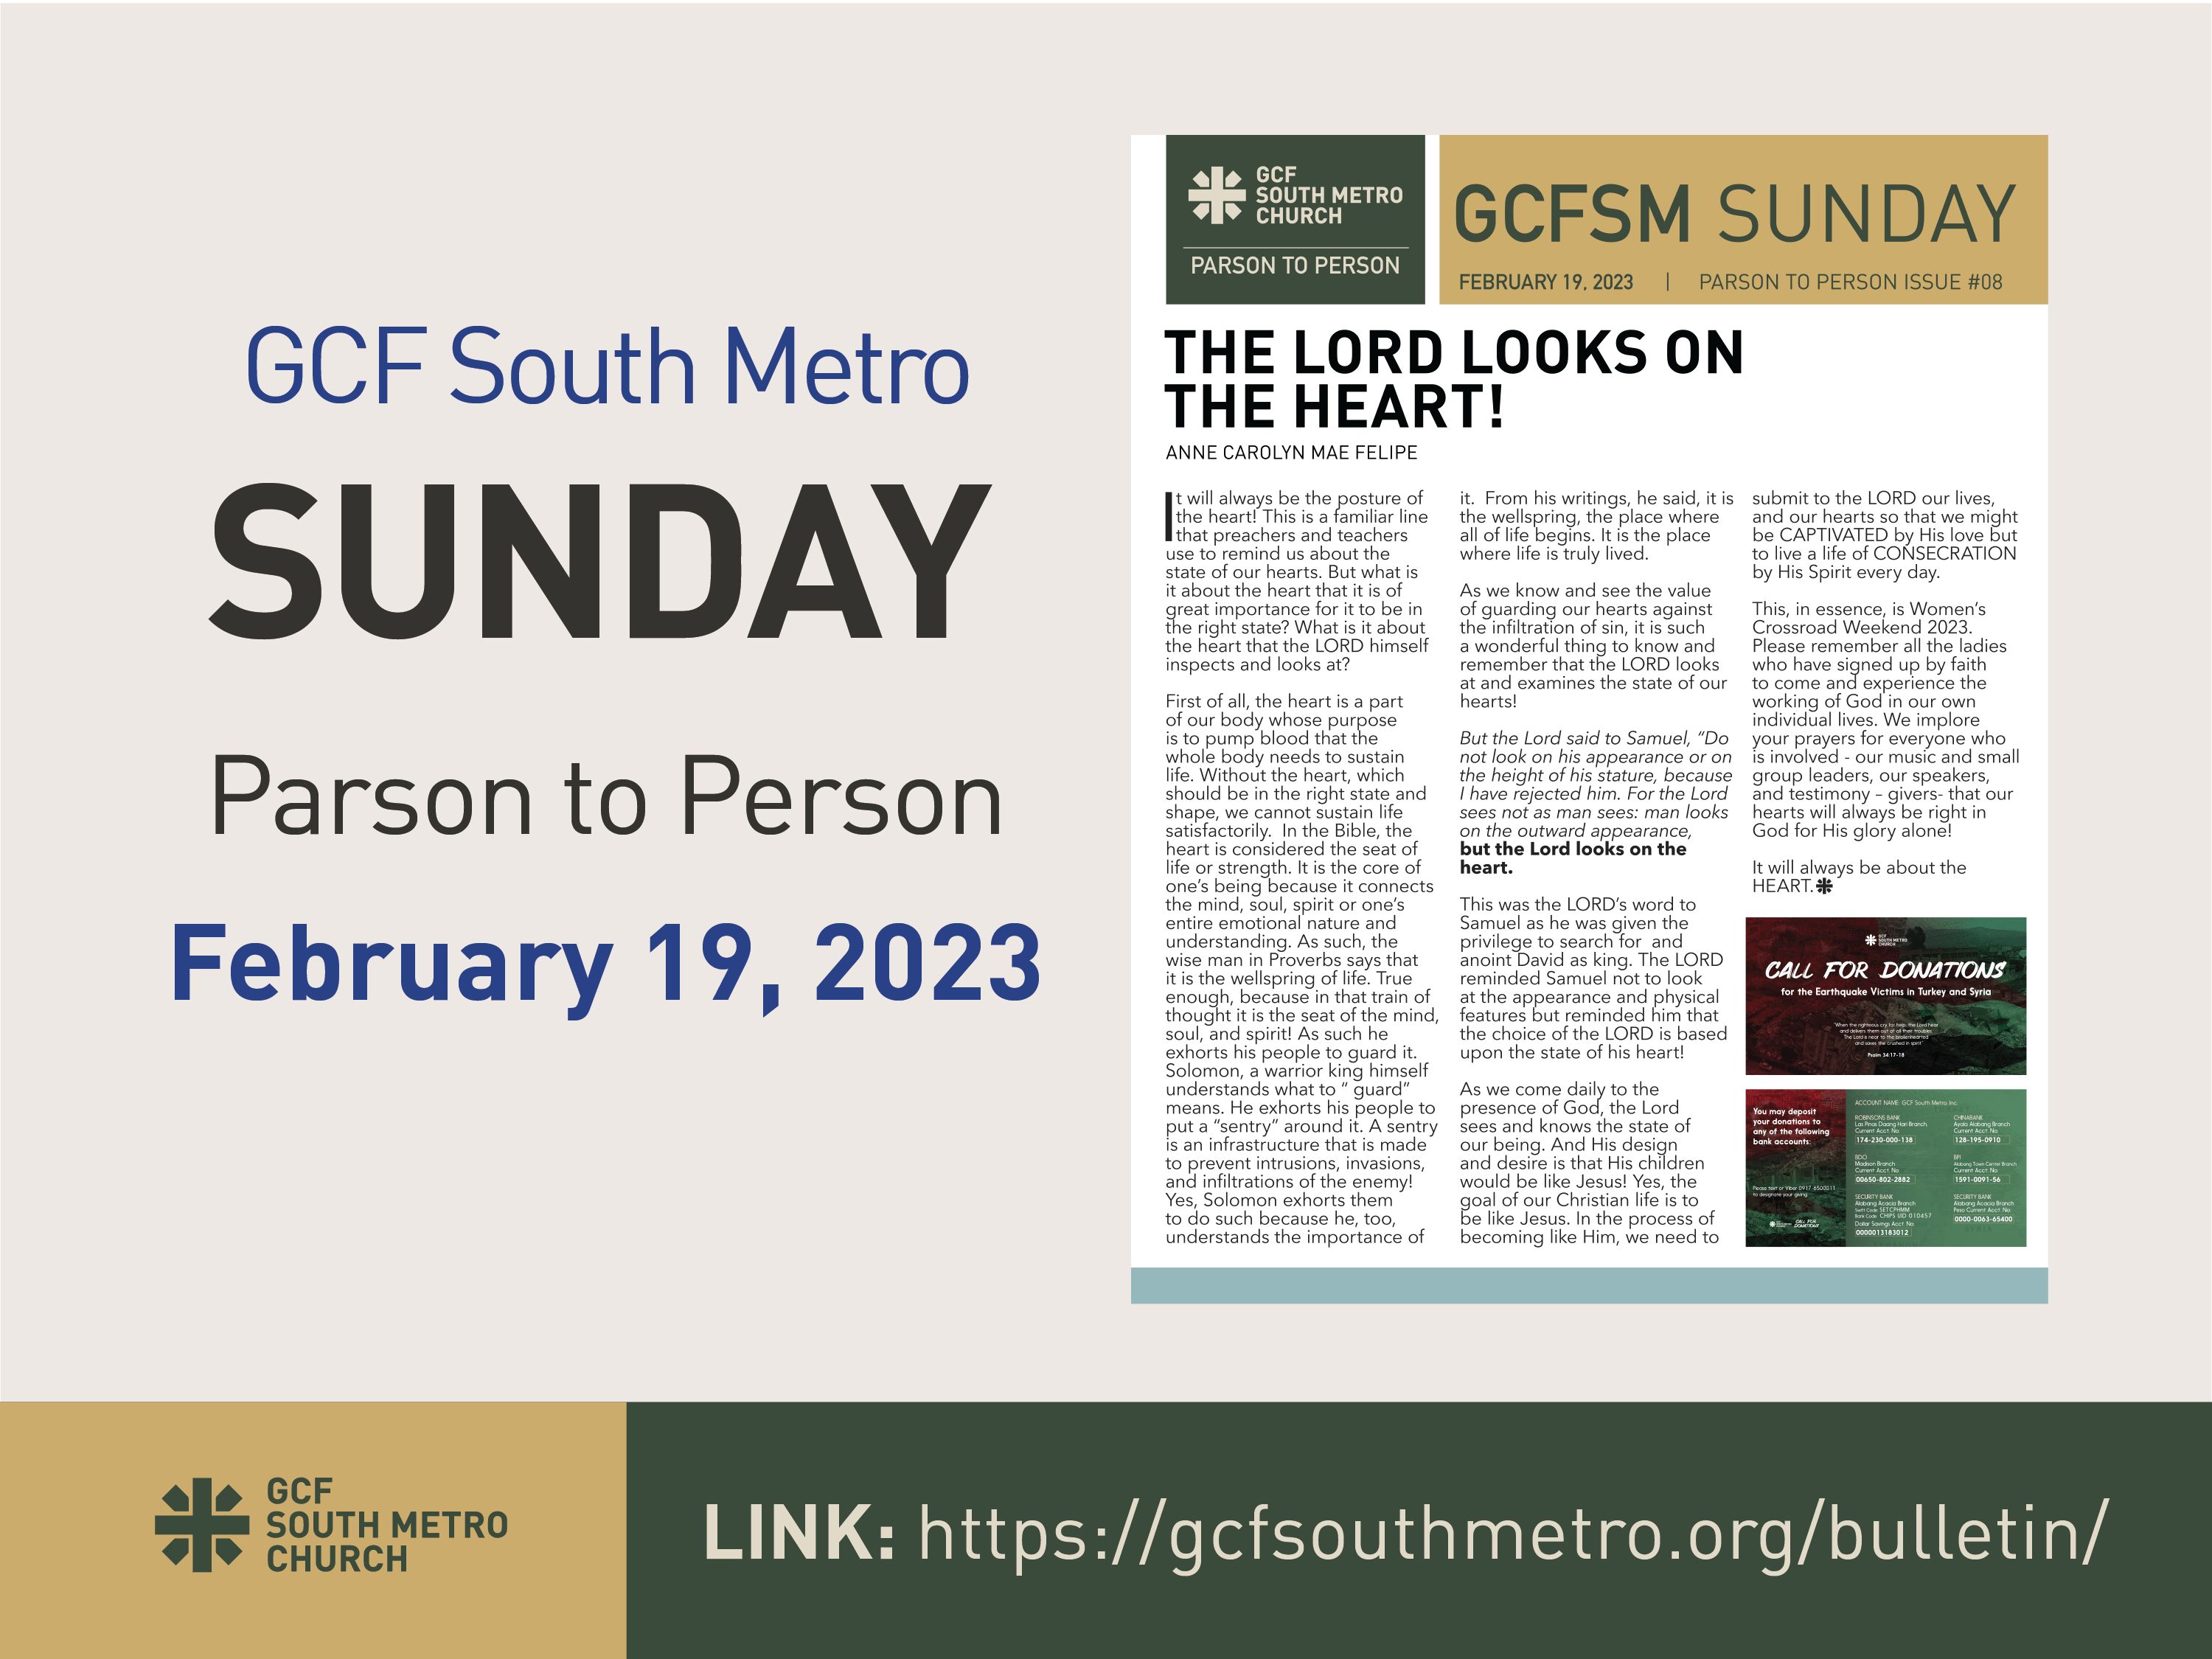 Sunday Bulletin – Parson to Person, February 19, 2023